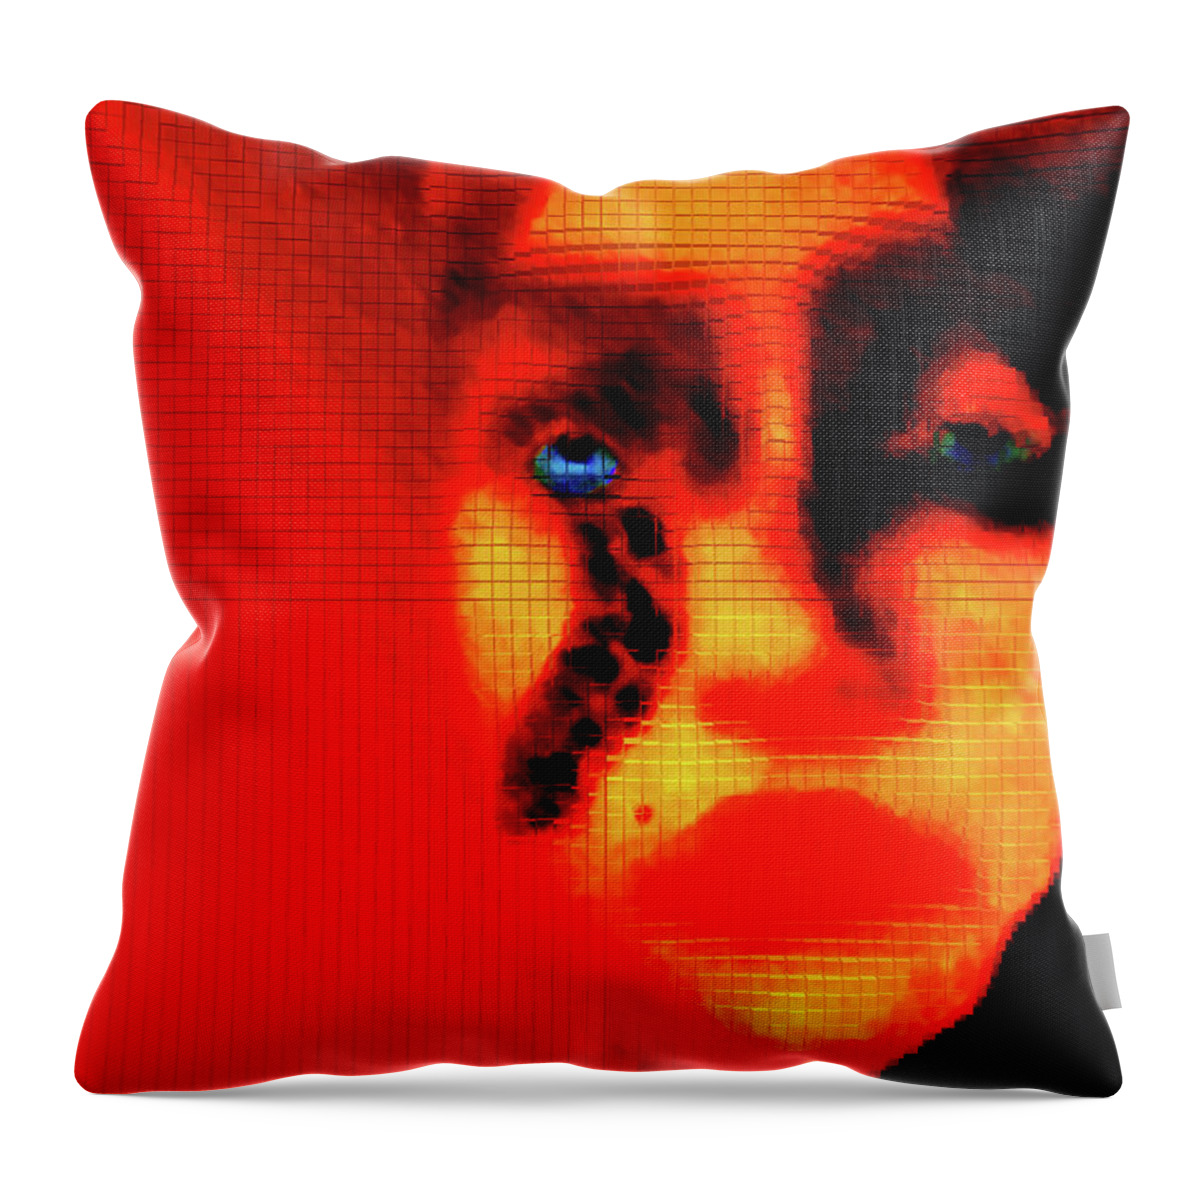  Throw Pillow featuring the digital art Fractured by Gabby Tary